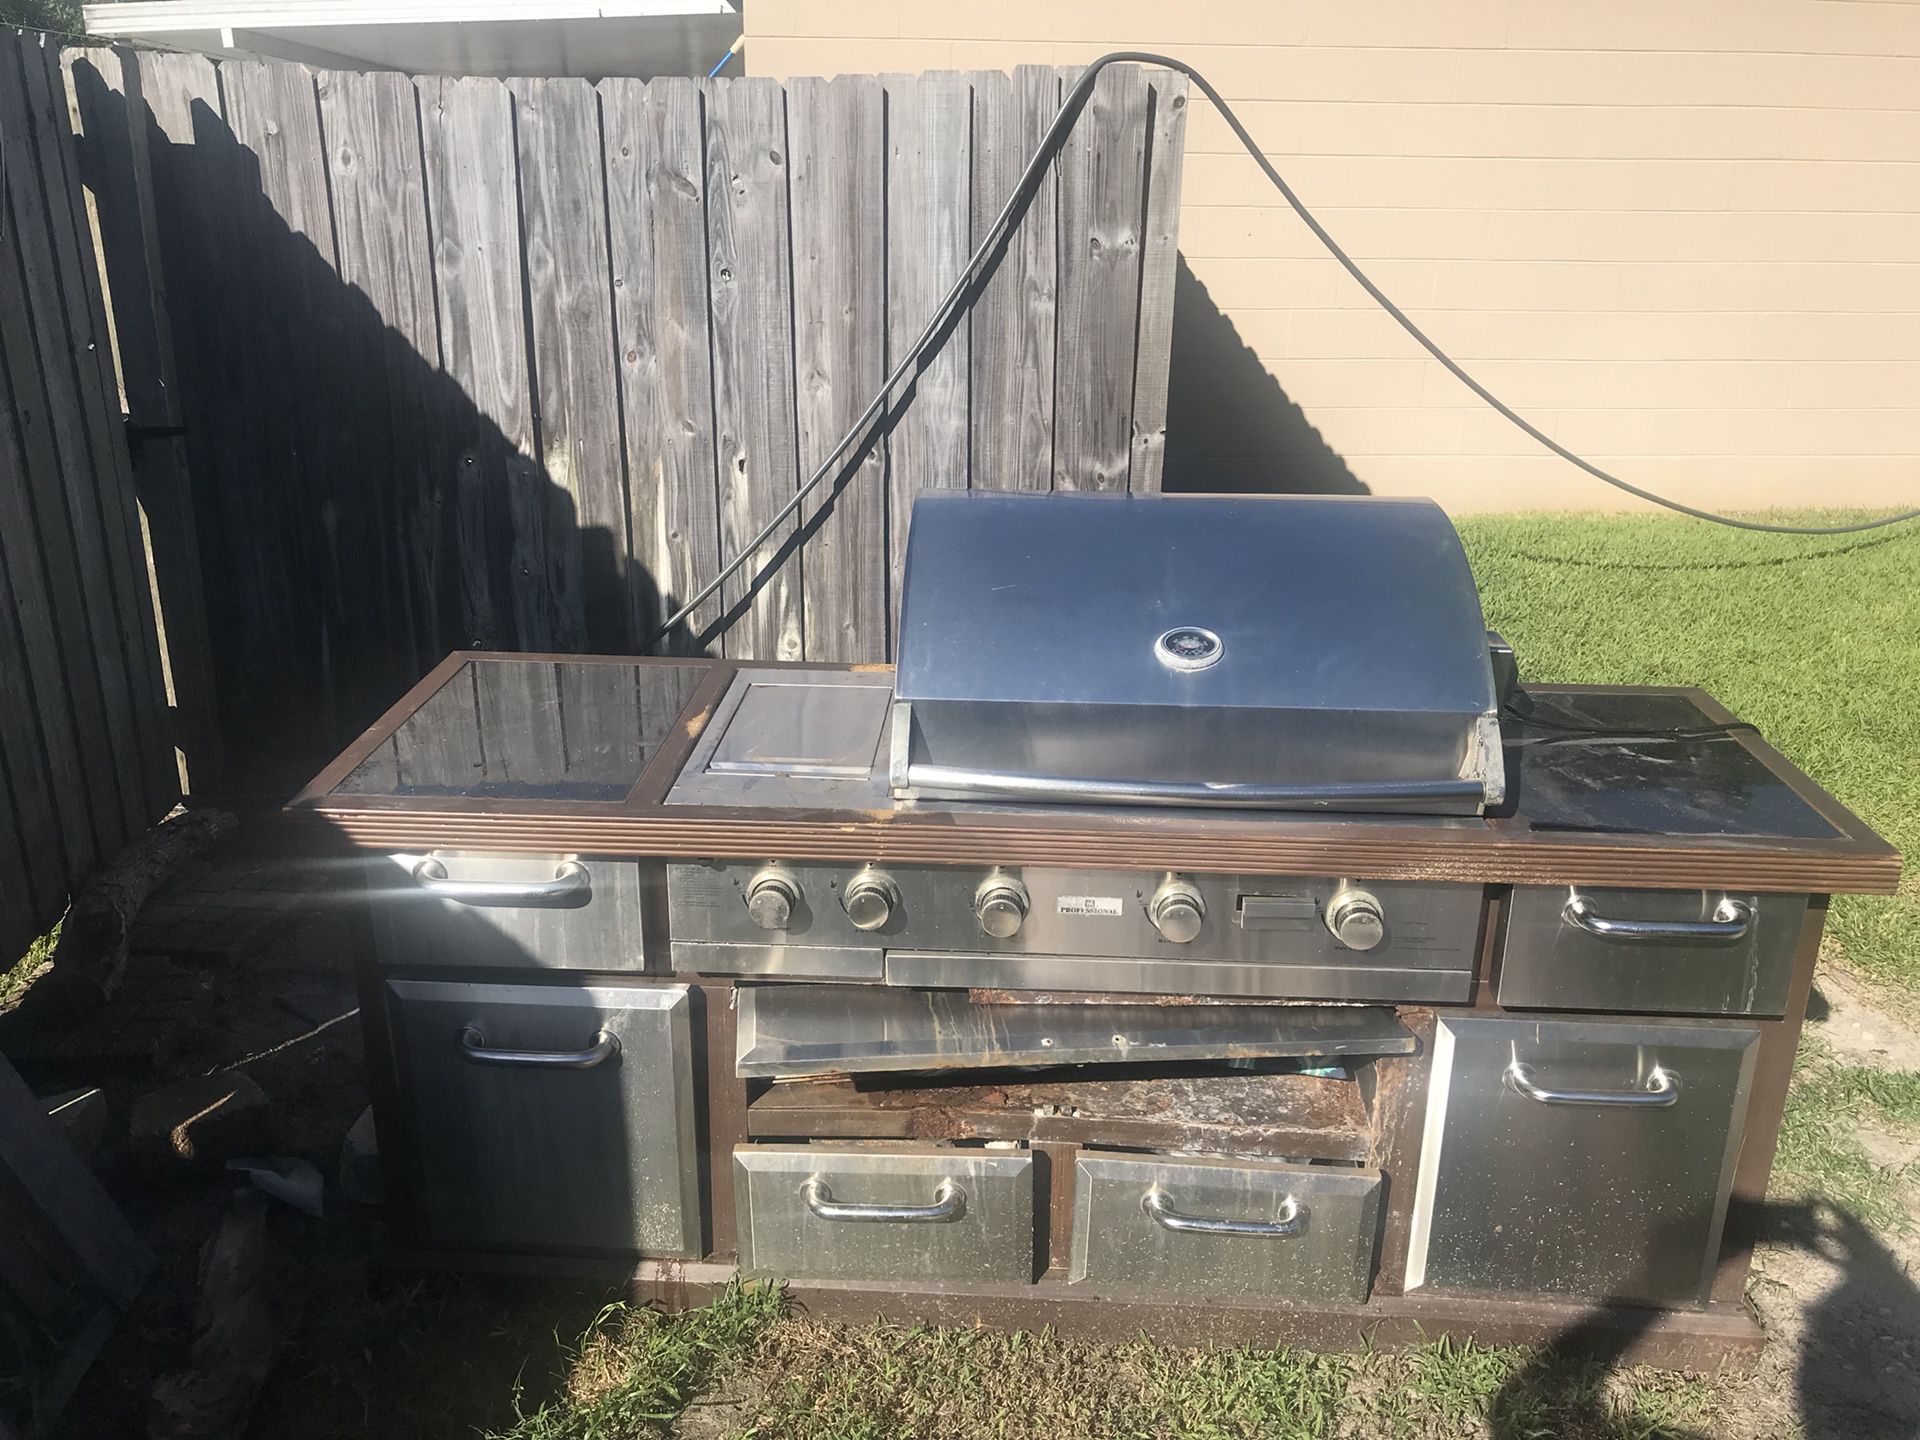 Free grill!